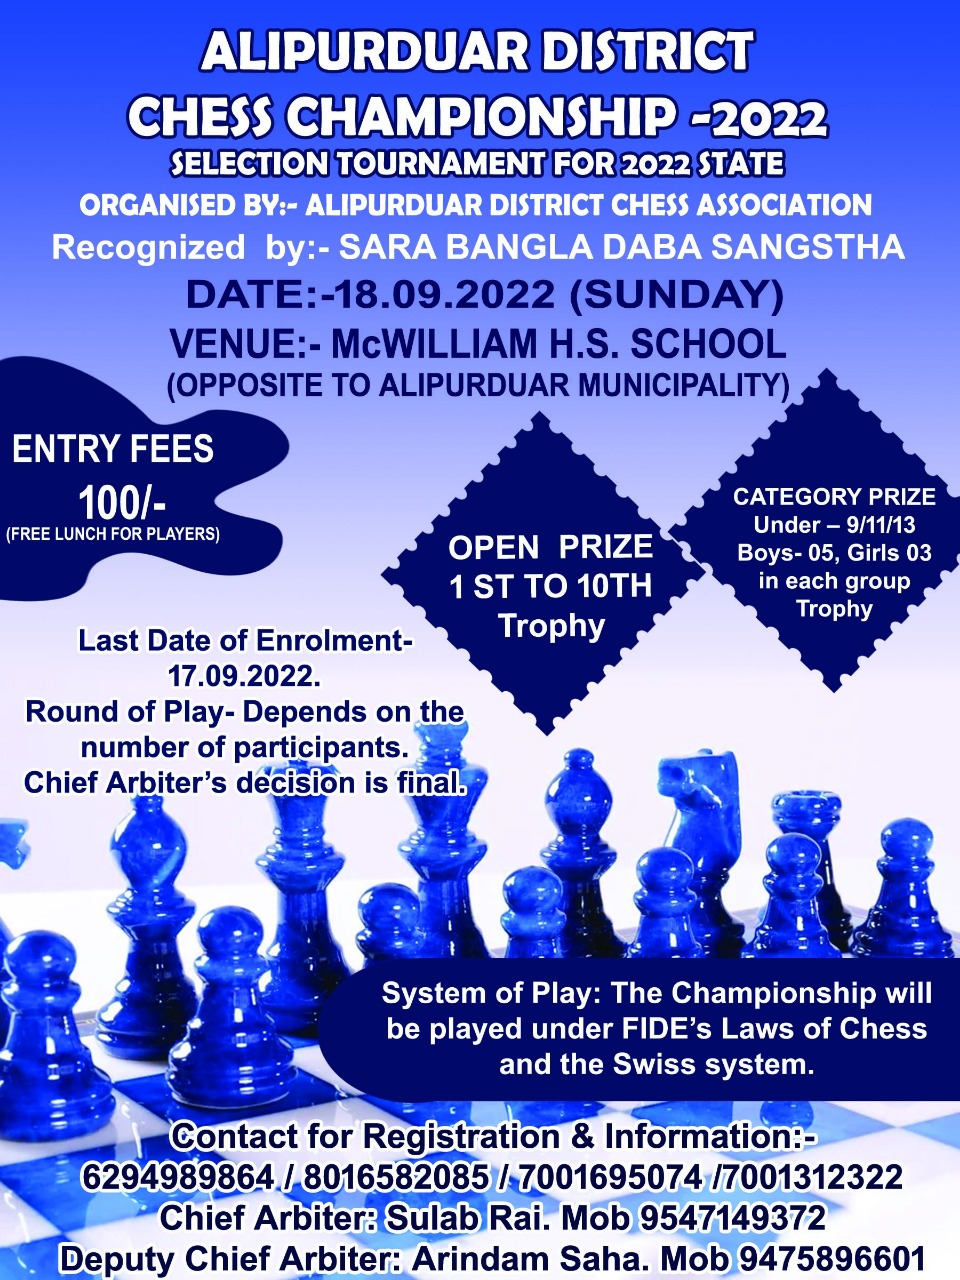 2nd DD-DBCA Open FIDE Rating Chess Tournament 2022 starts today This is the  first Open Classical FIDE Rating tournament taking place in…